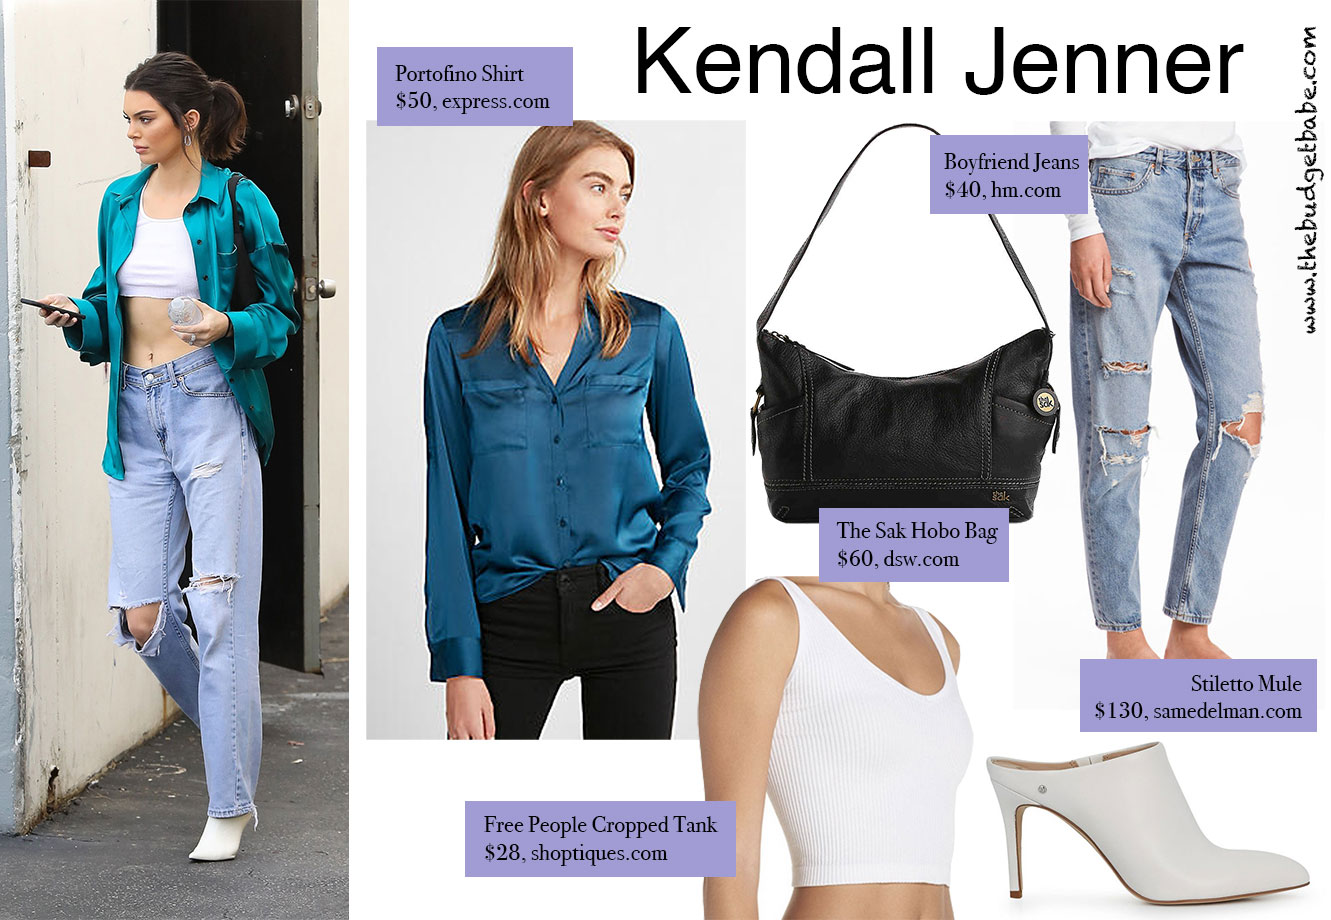 Kendall Jenner's teal jacket and jeans look for less